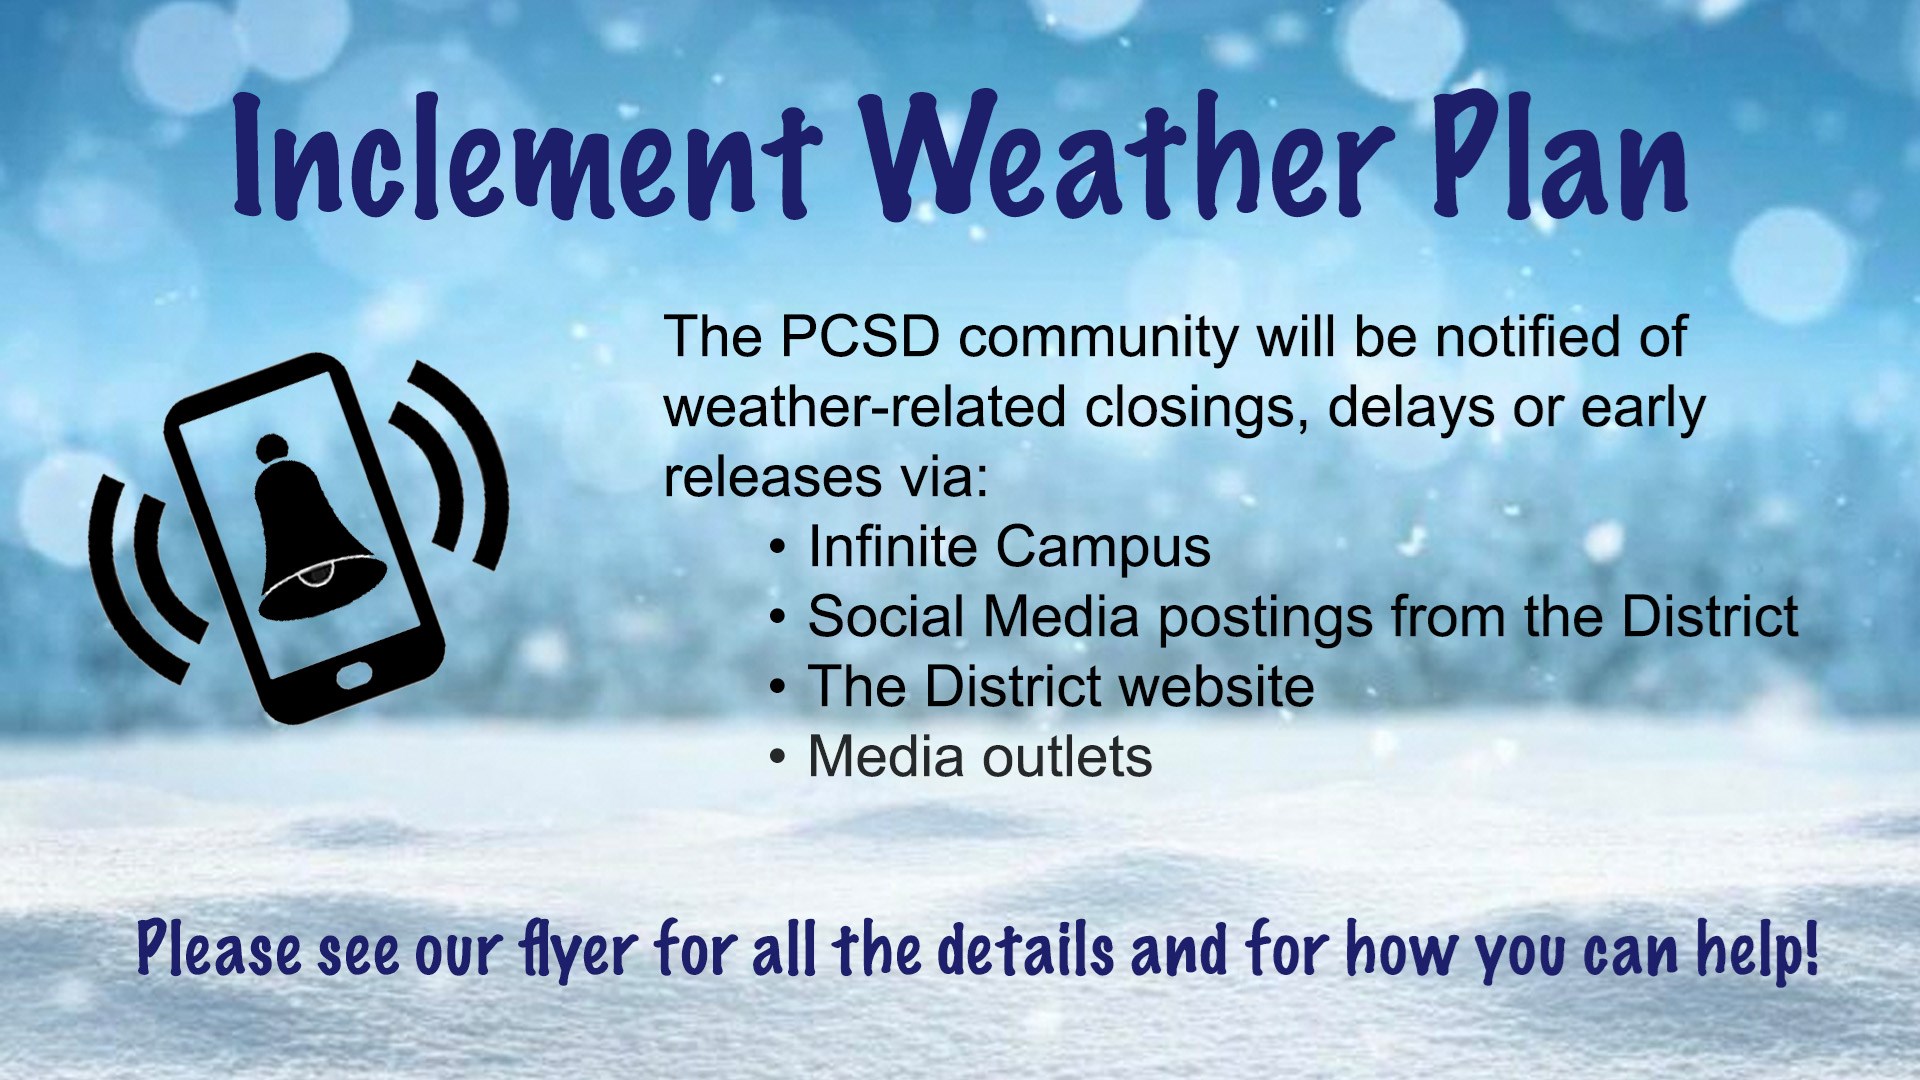 Inclement Weather Information